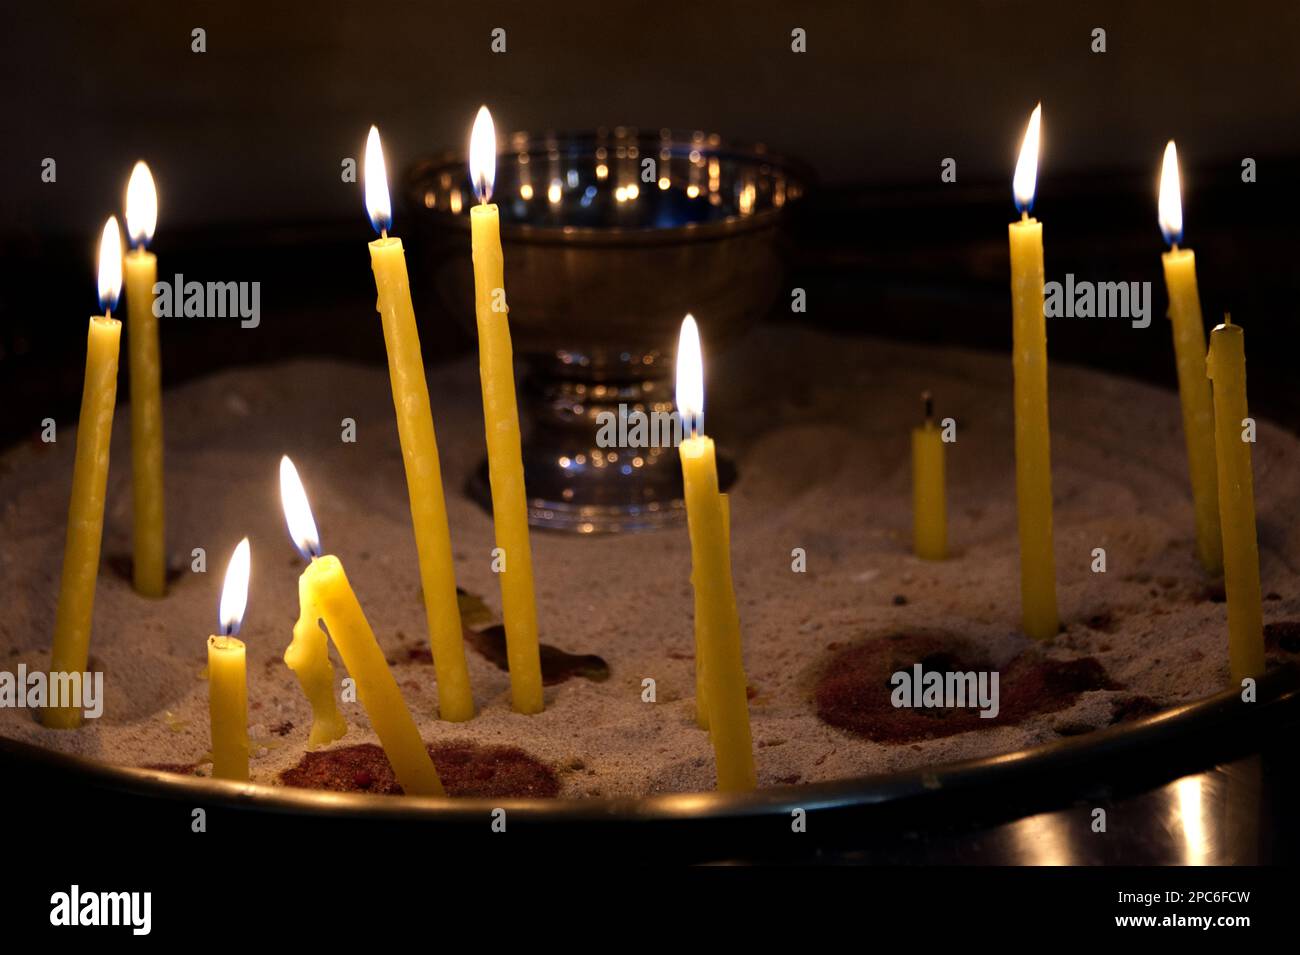 Many yellow candles burning in a church as symbol of belief and hope Stock Photo